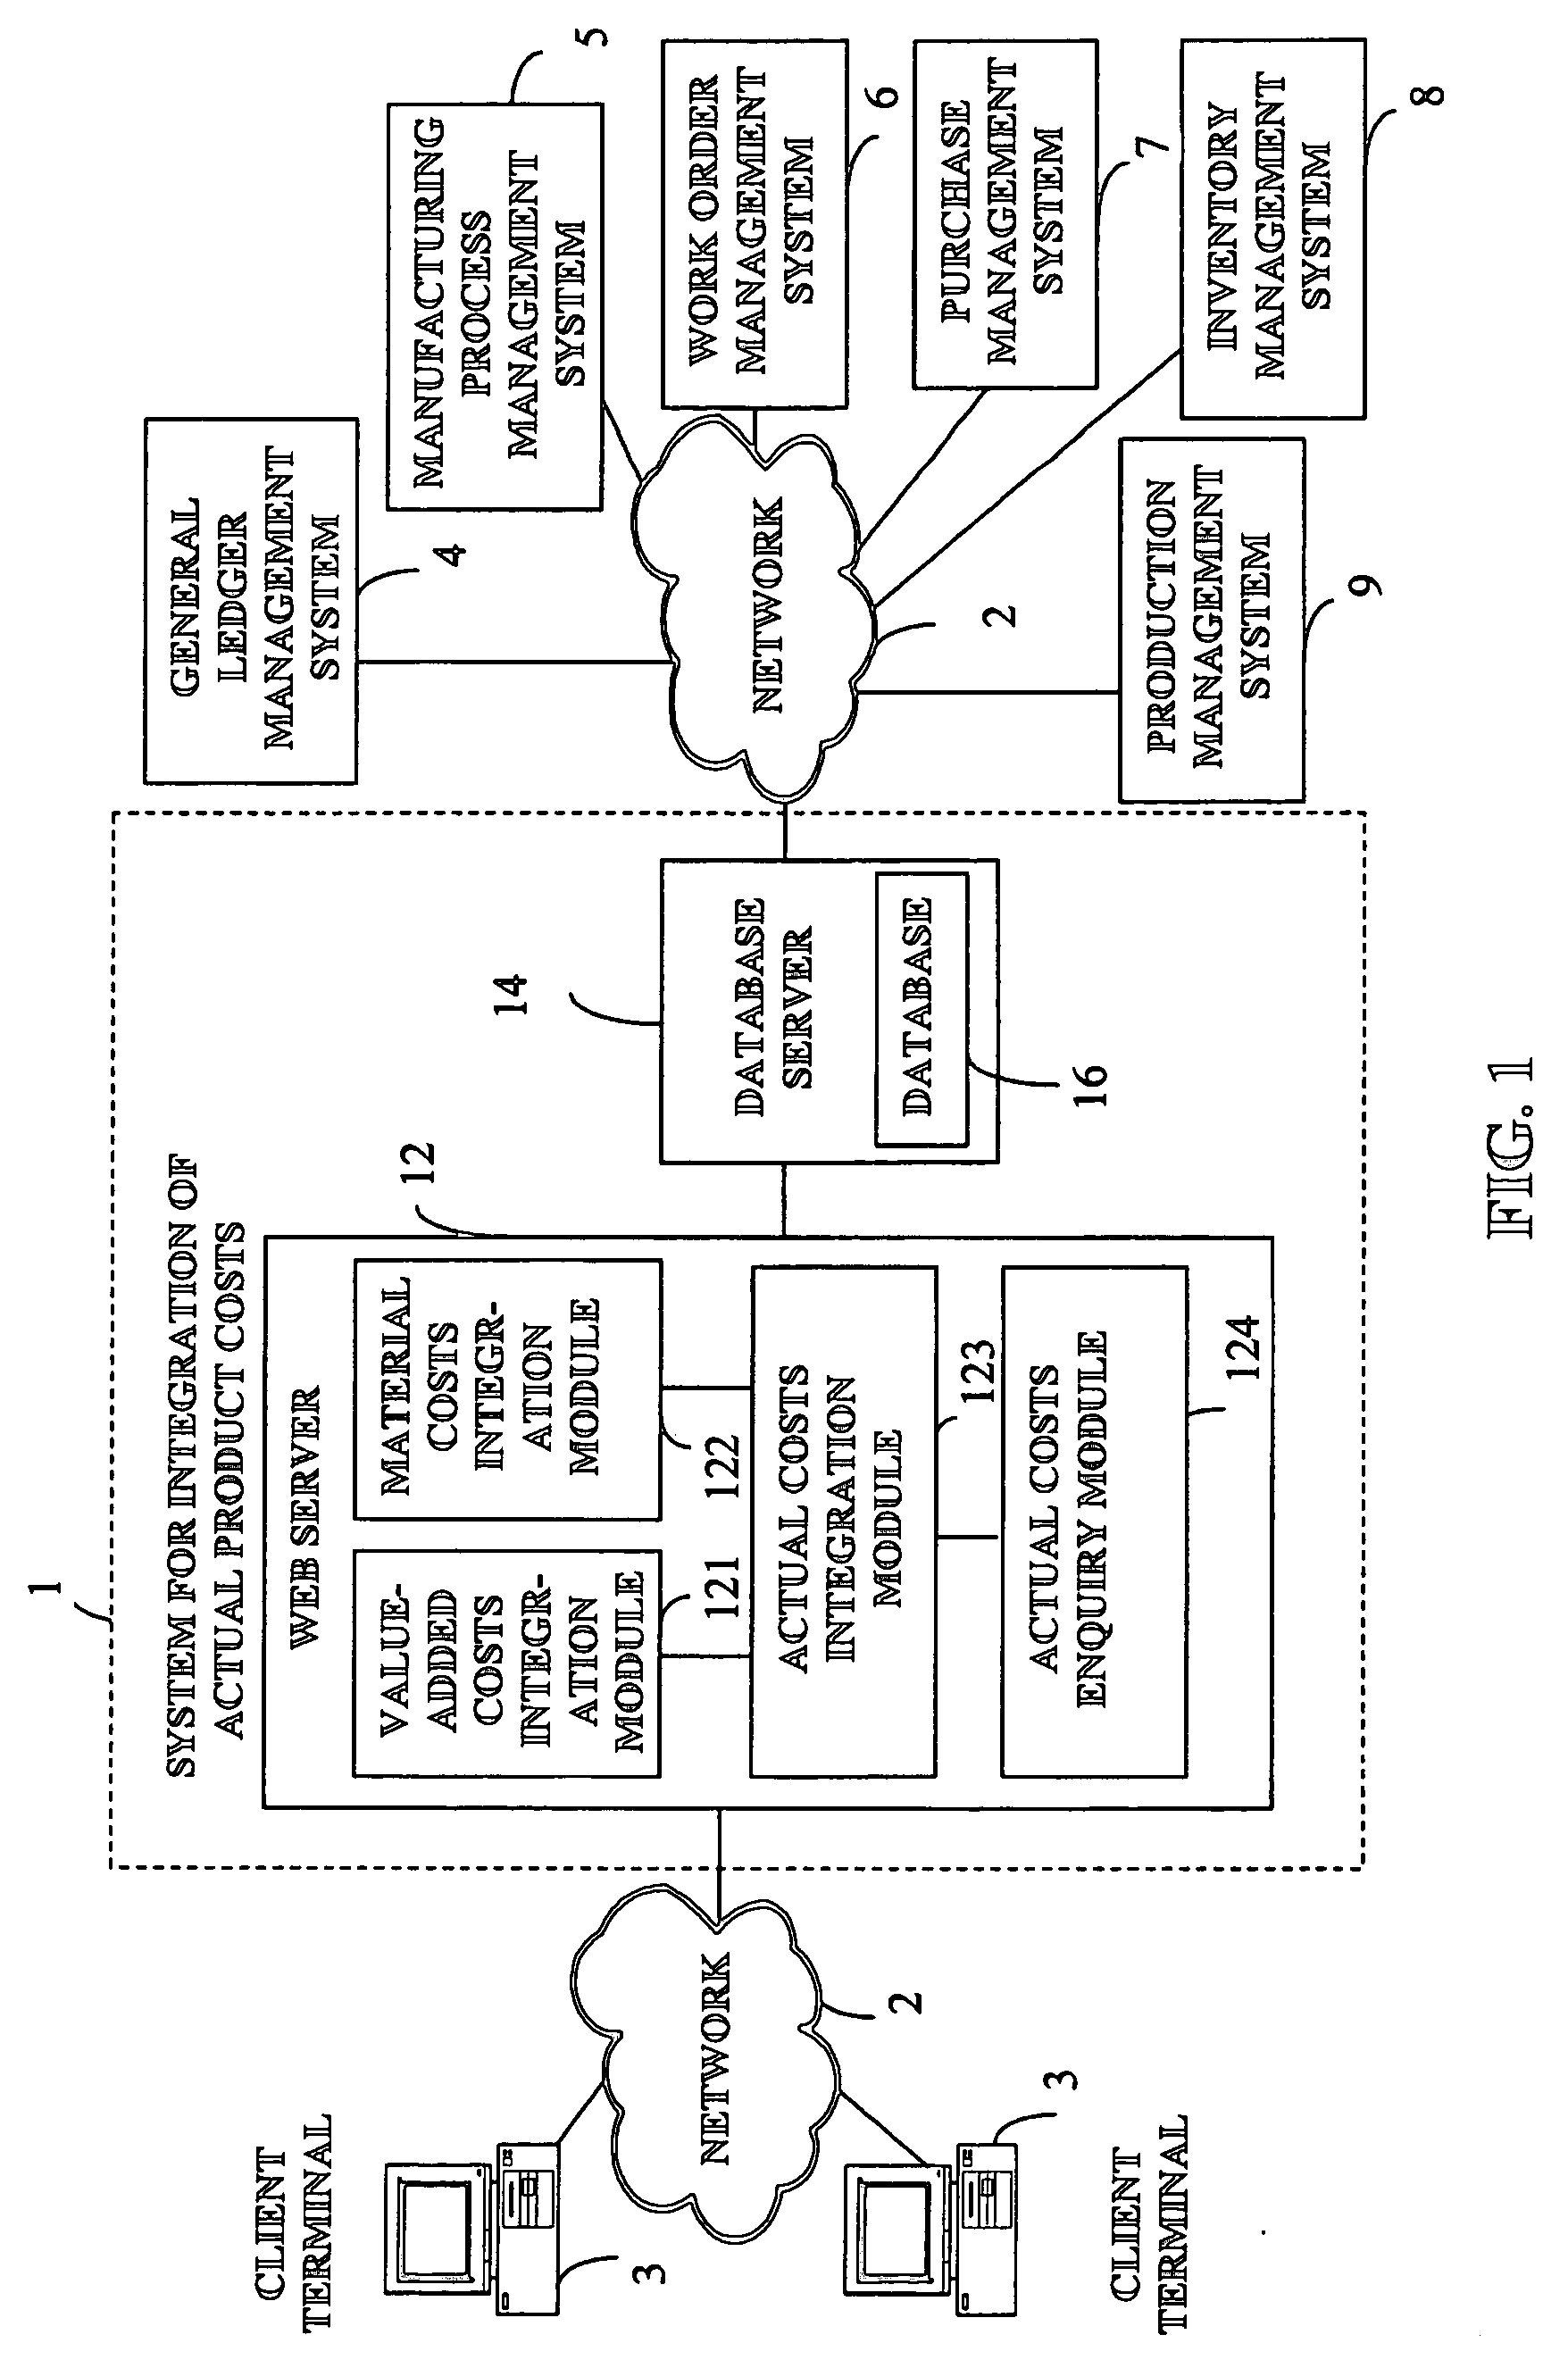 System and method for integration of actual product costs